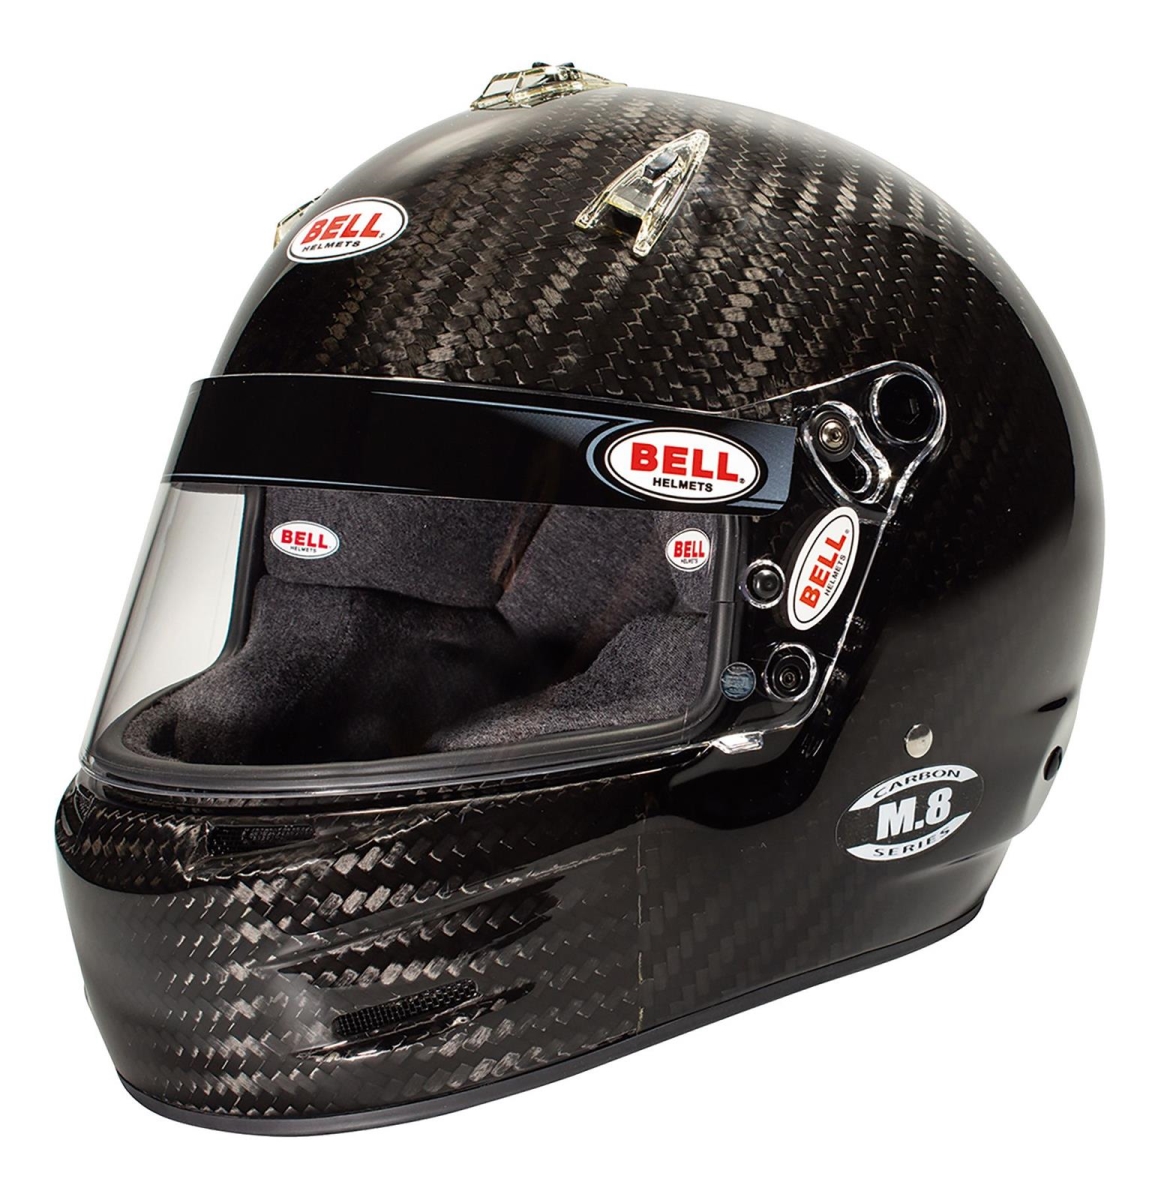 Picture of Bell Helmets BEL1208A07 Helmet for M8 7-5-8 61 Carbon SA2020 & FIA8859